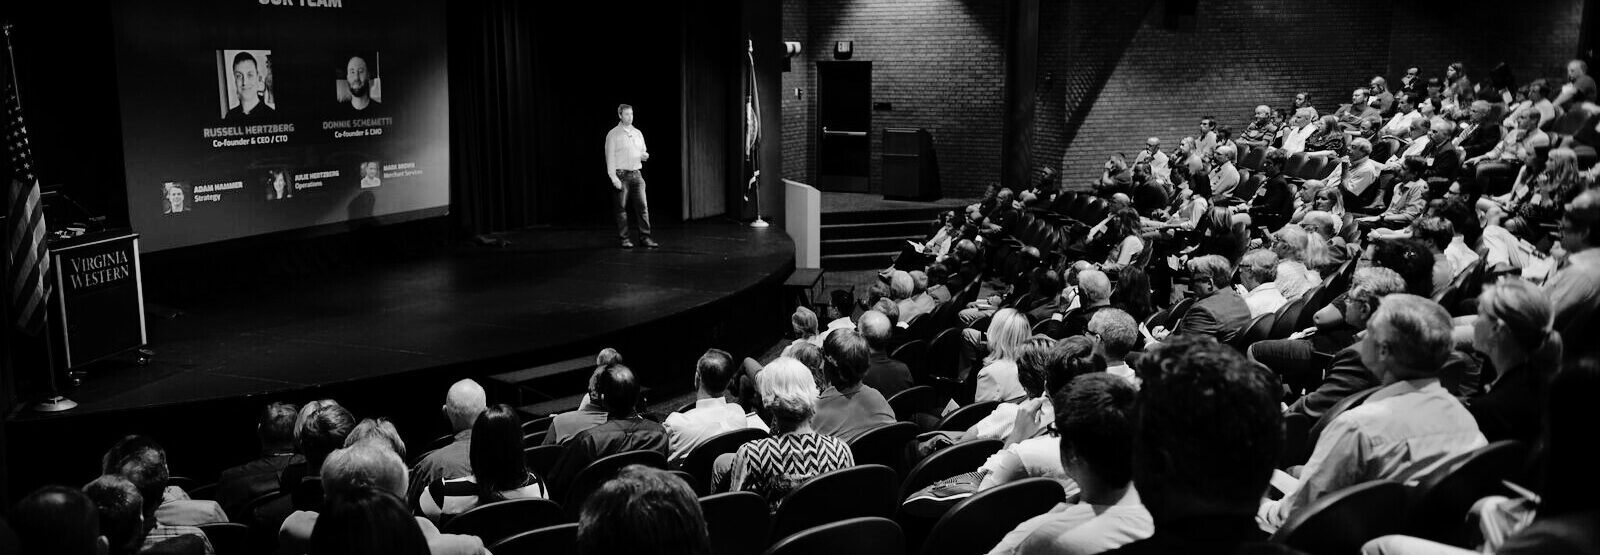 black and white photo of a man on a stage giving a presentation to an auditorium of people